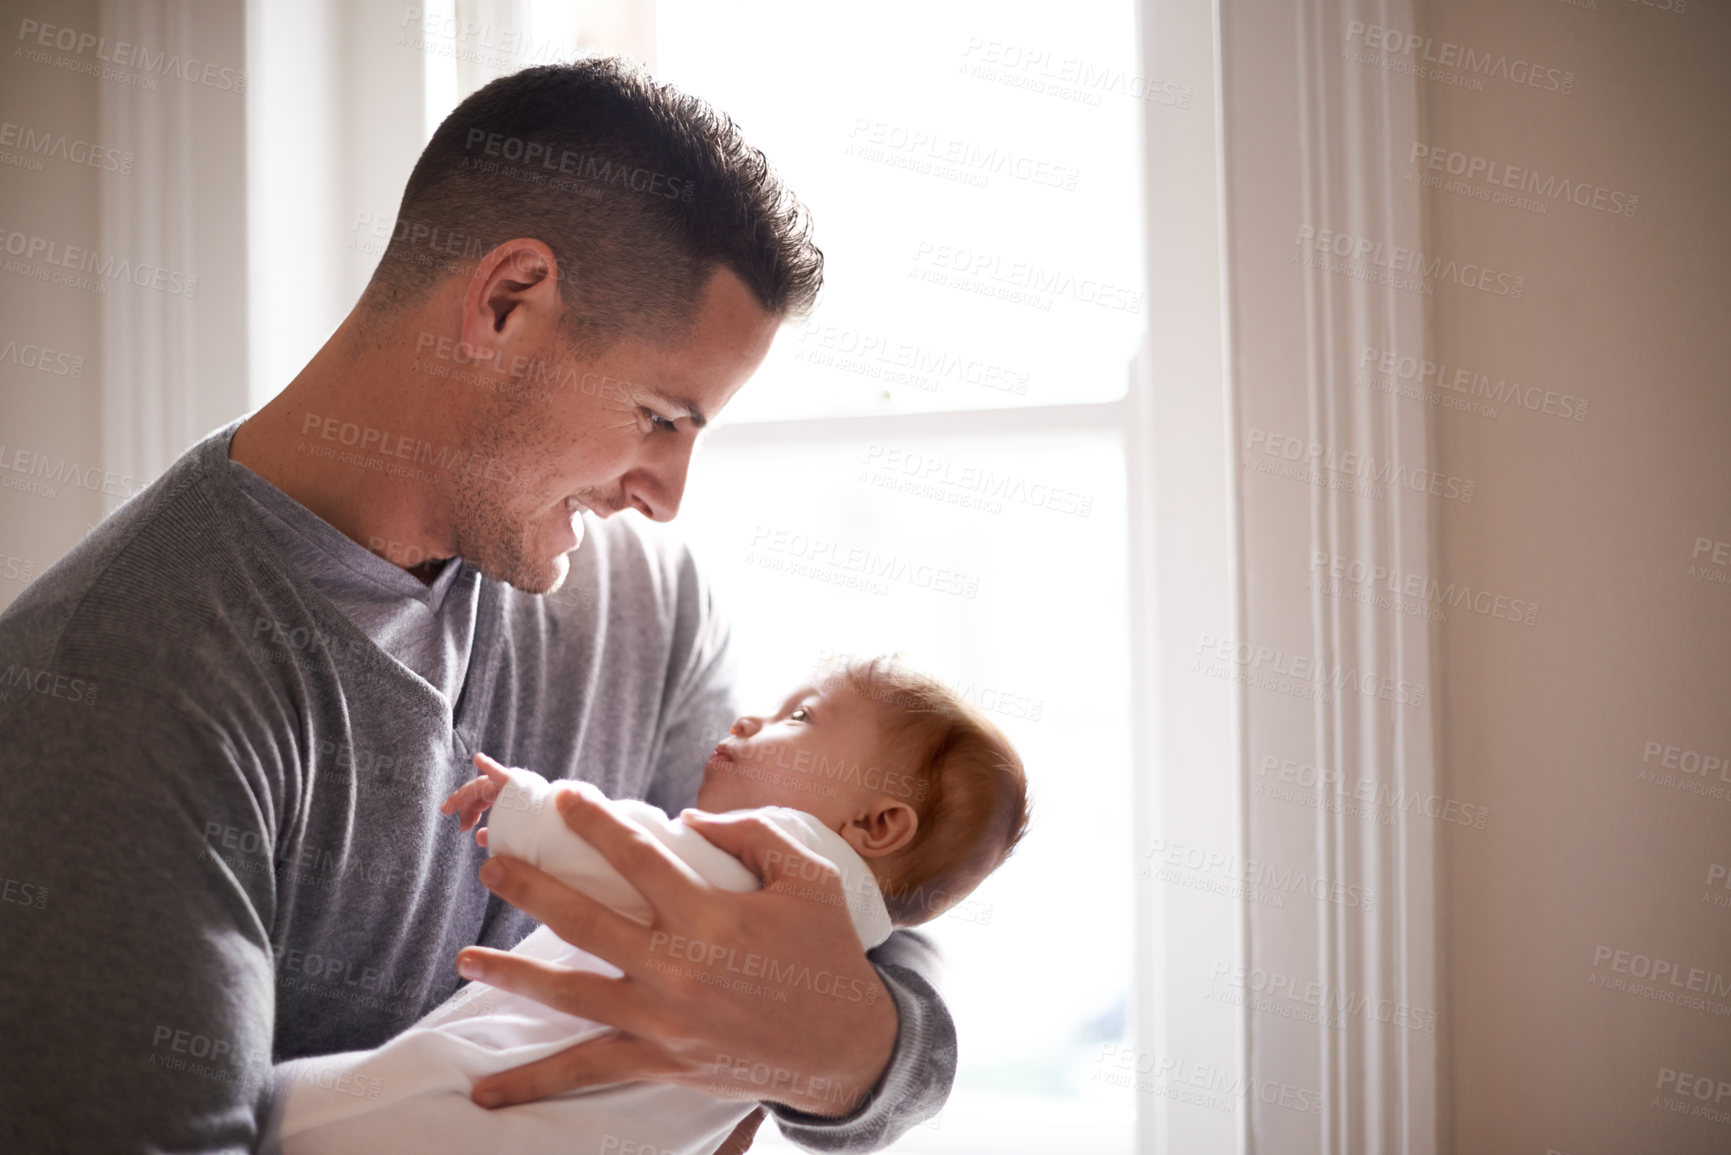 Buy stock photo Father, baby and home window with care, love and support together with family bonding and development. Dad, smile and young child in a house with kid and parent happy and proud about infant growth